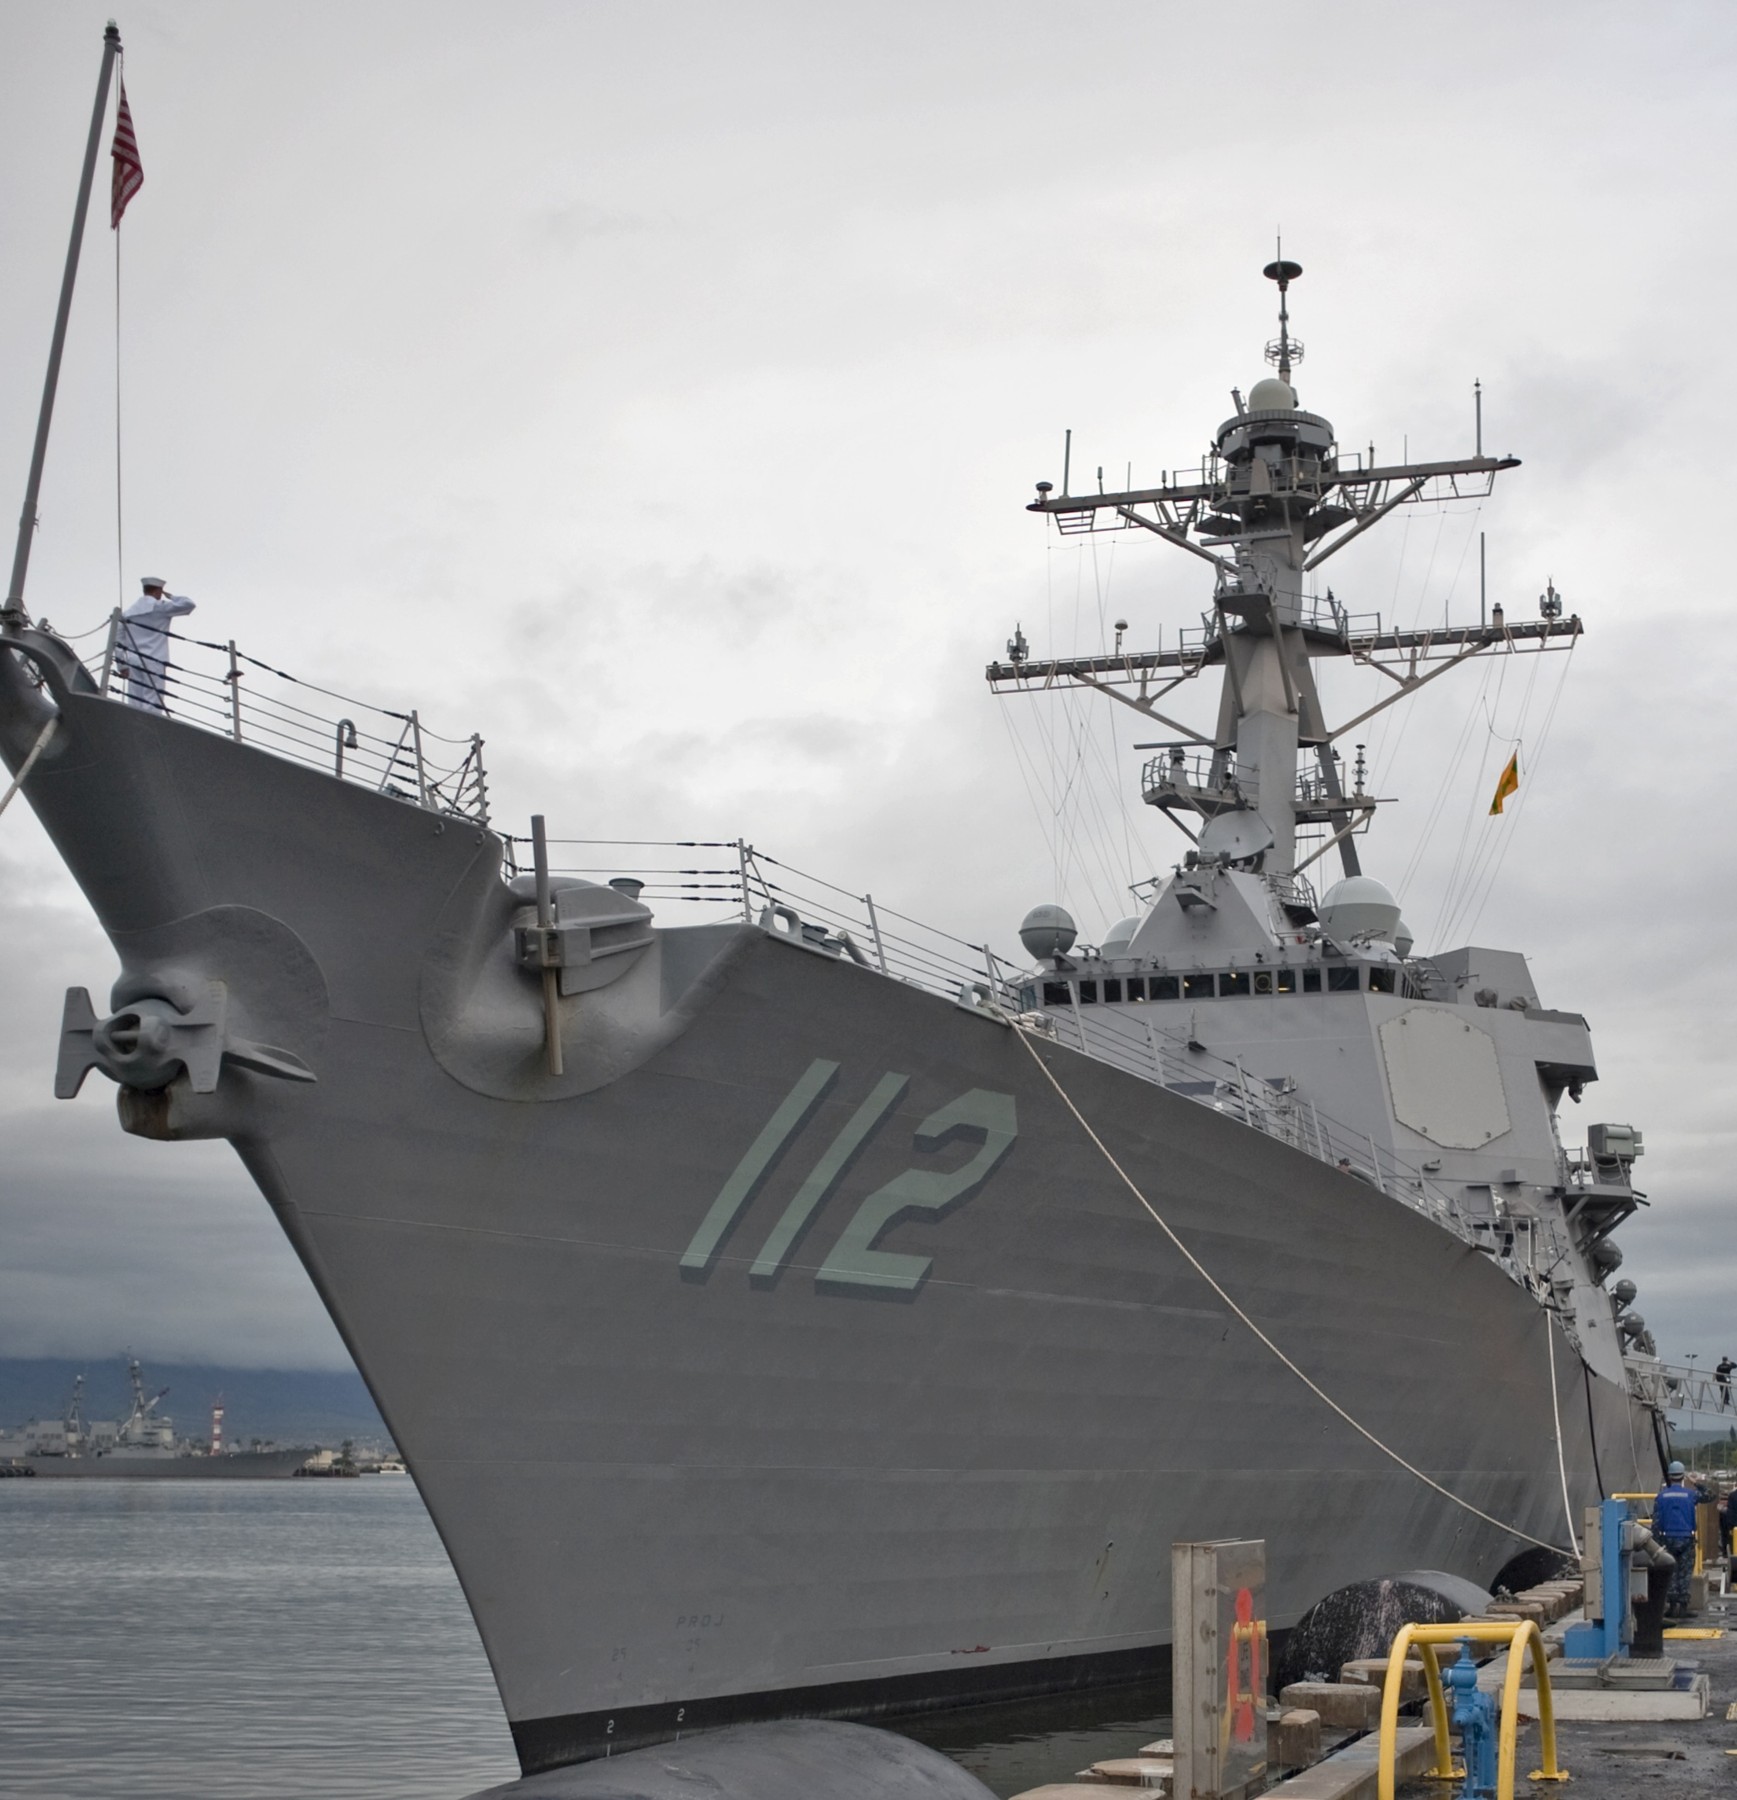 ddg-112 uss michael murphy arleigh burke class guided missile destroyer aegis us navy 12